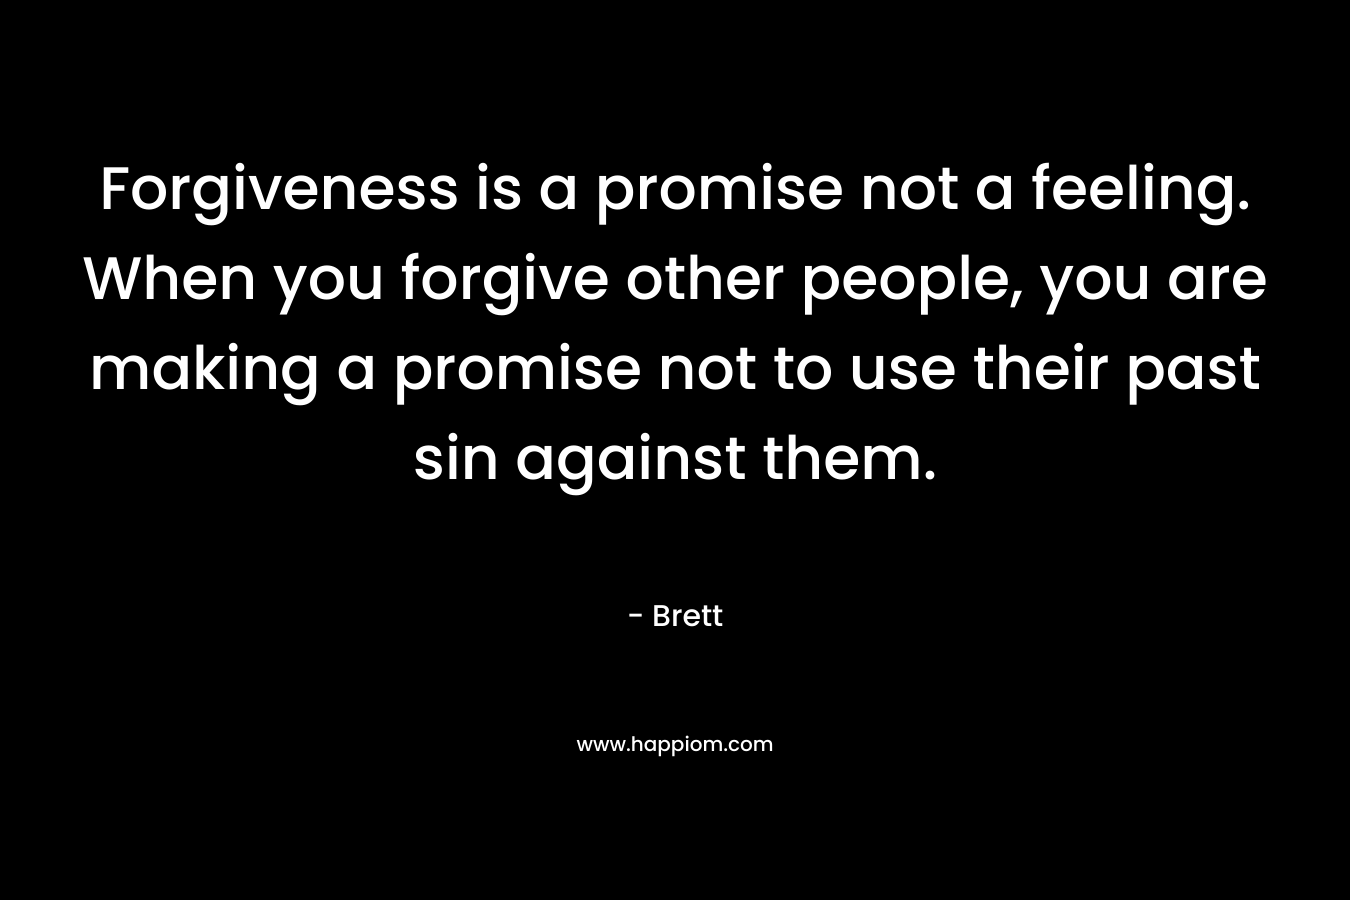 Forgiveness is a promise not a feeling. When you forgive other people, you are making a promise not to use their past sin against them.